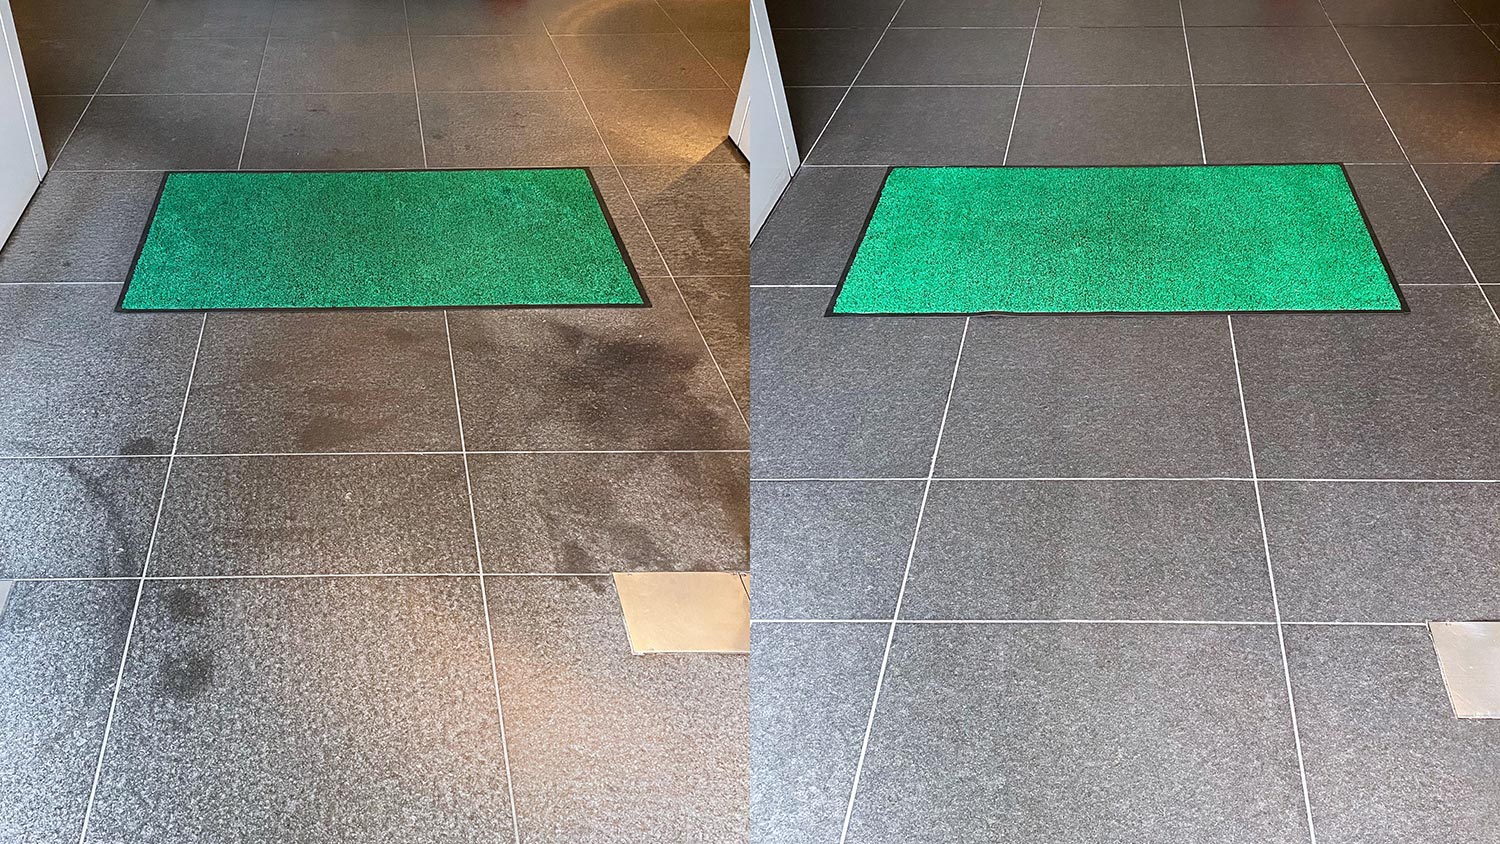 Removing oil stains and cleaning an entrance floor